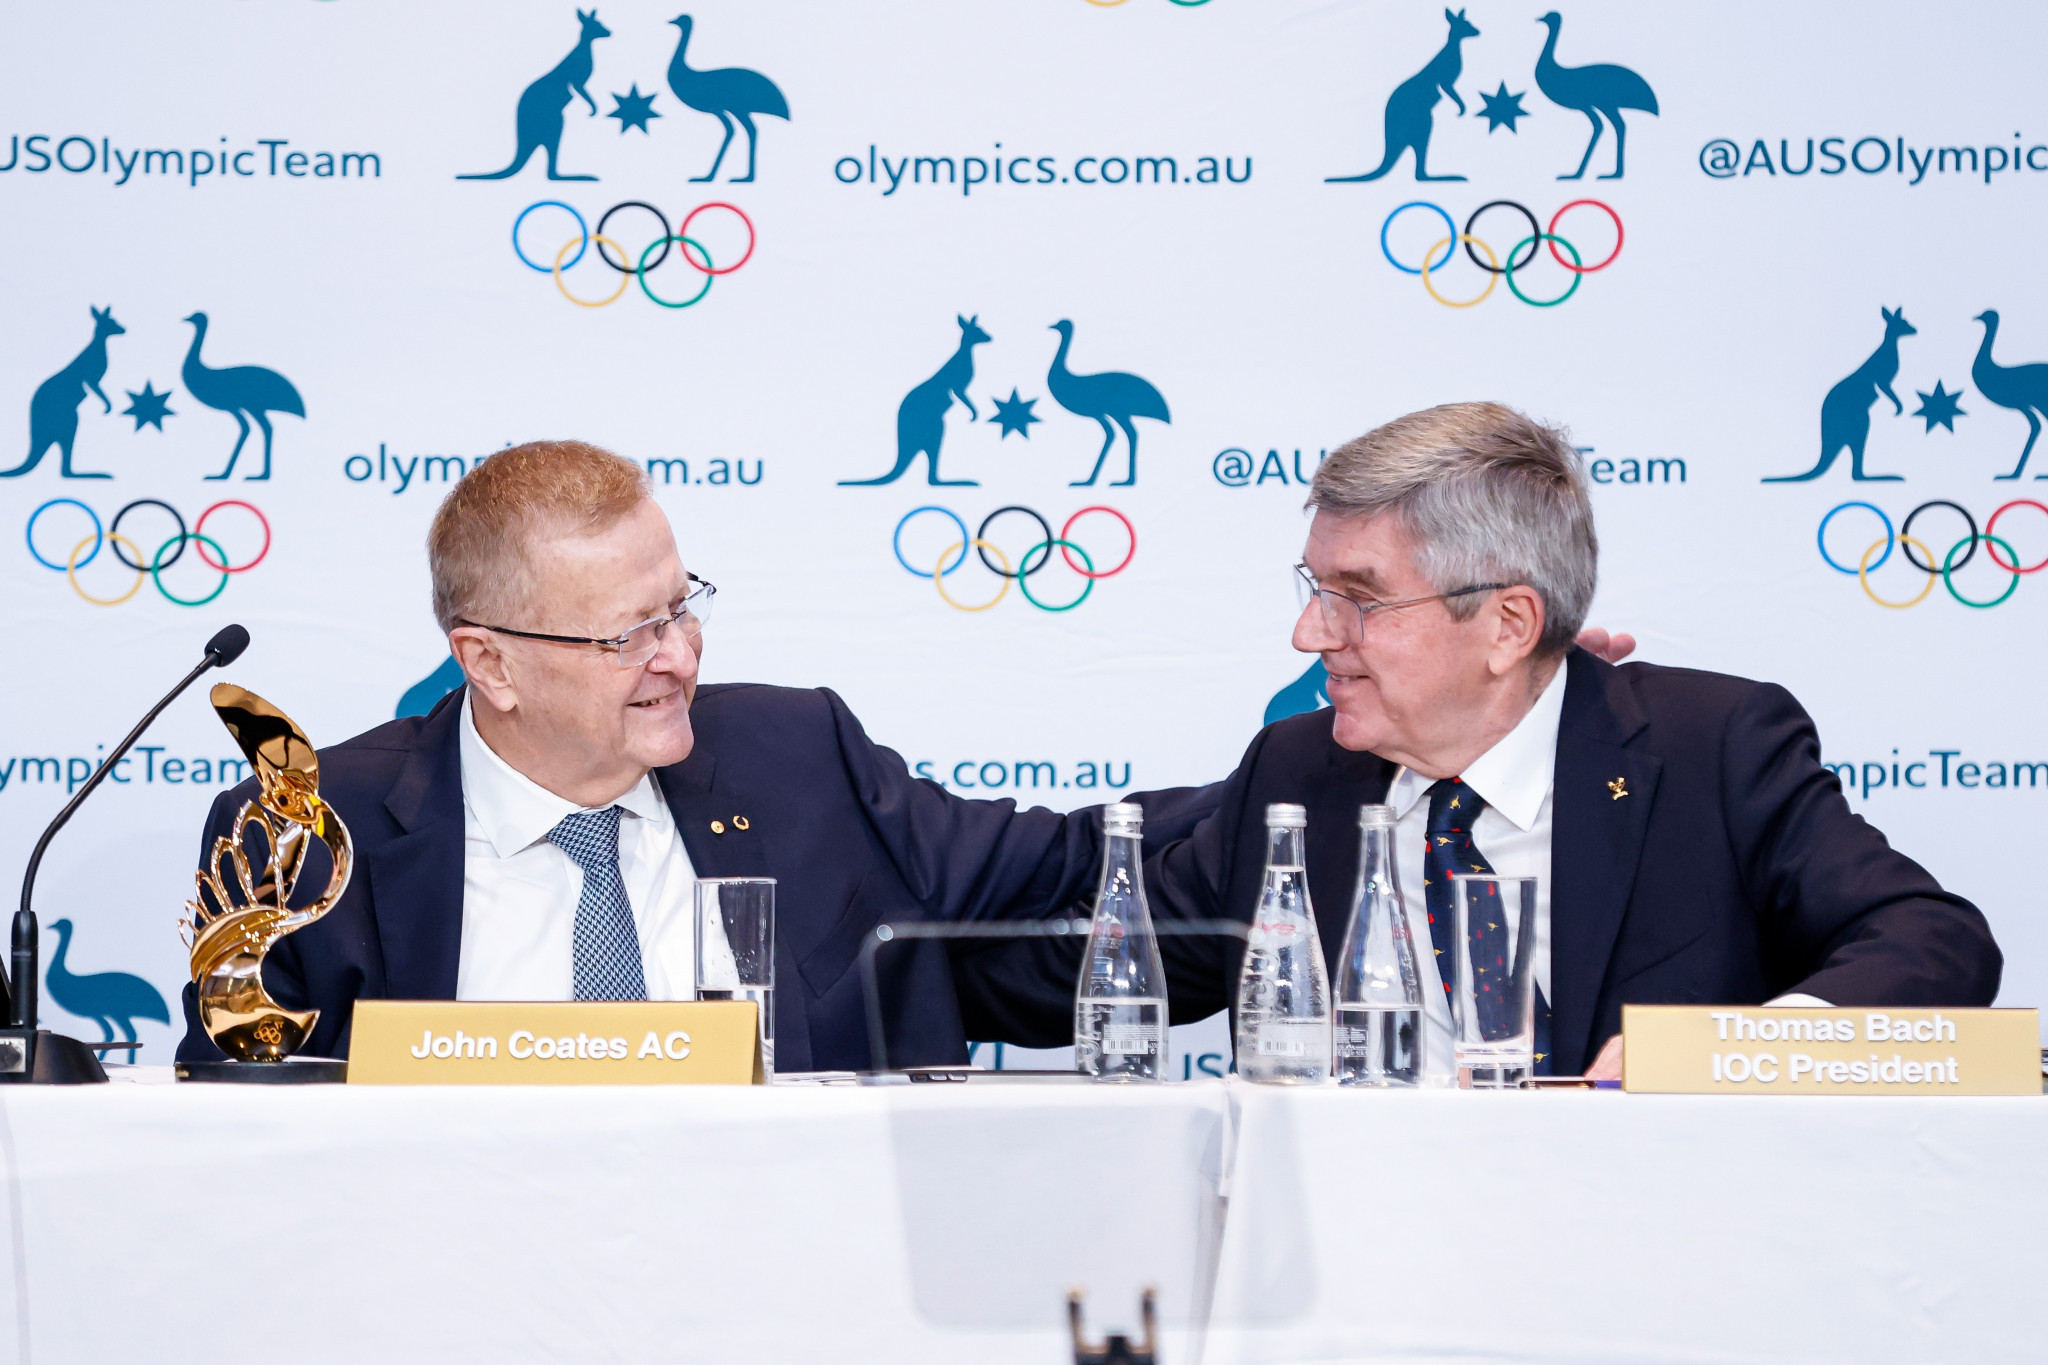 IOC President Thomas Bach claimed John Coates had left big shoes to fill after ending his 32-year spell as head of the AOC ©Getty Images